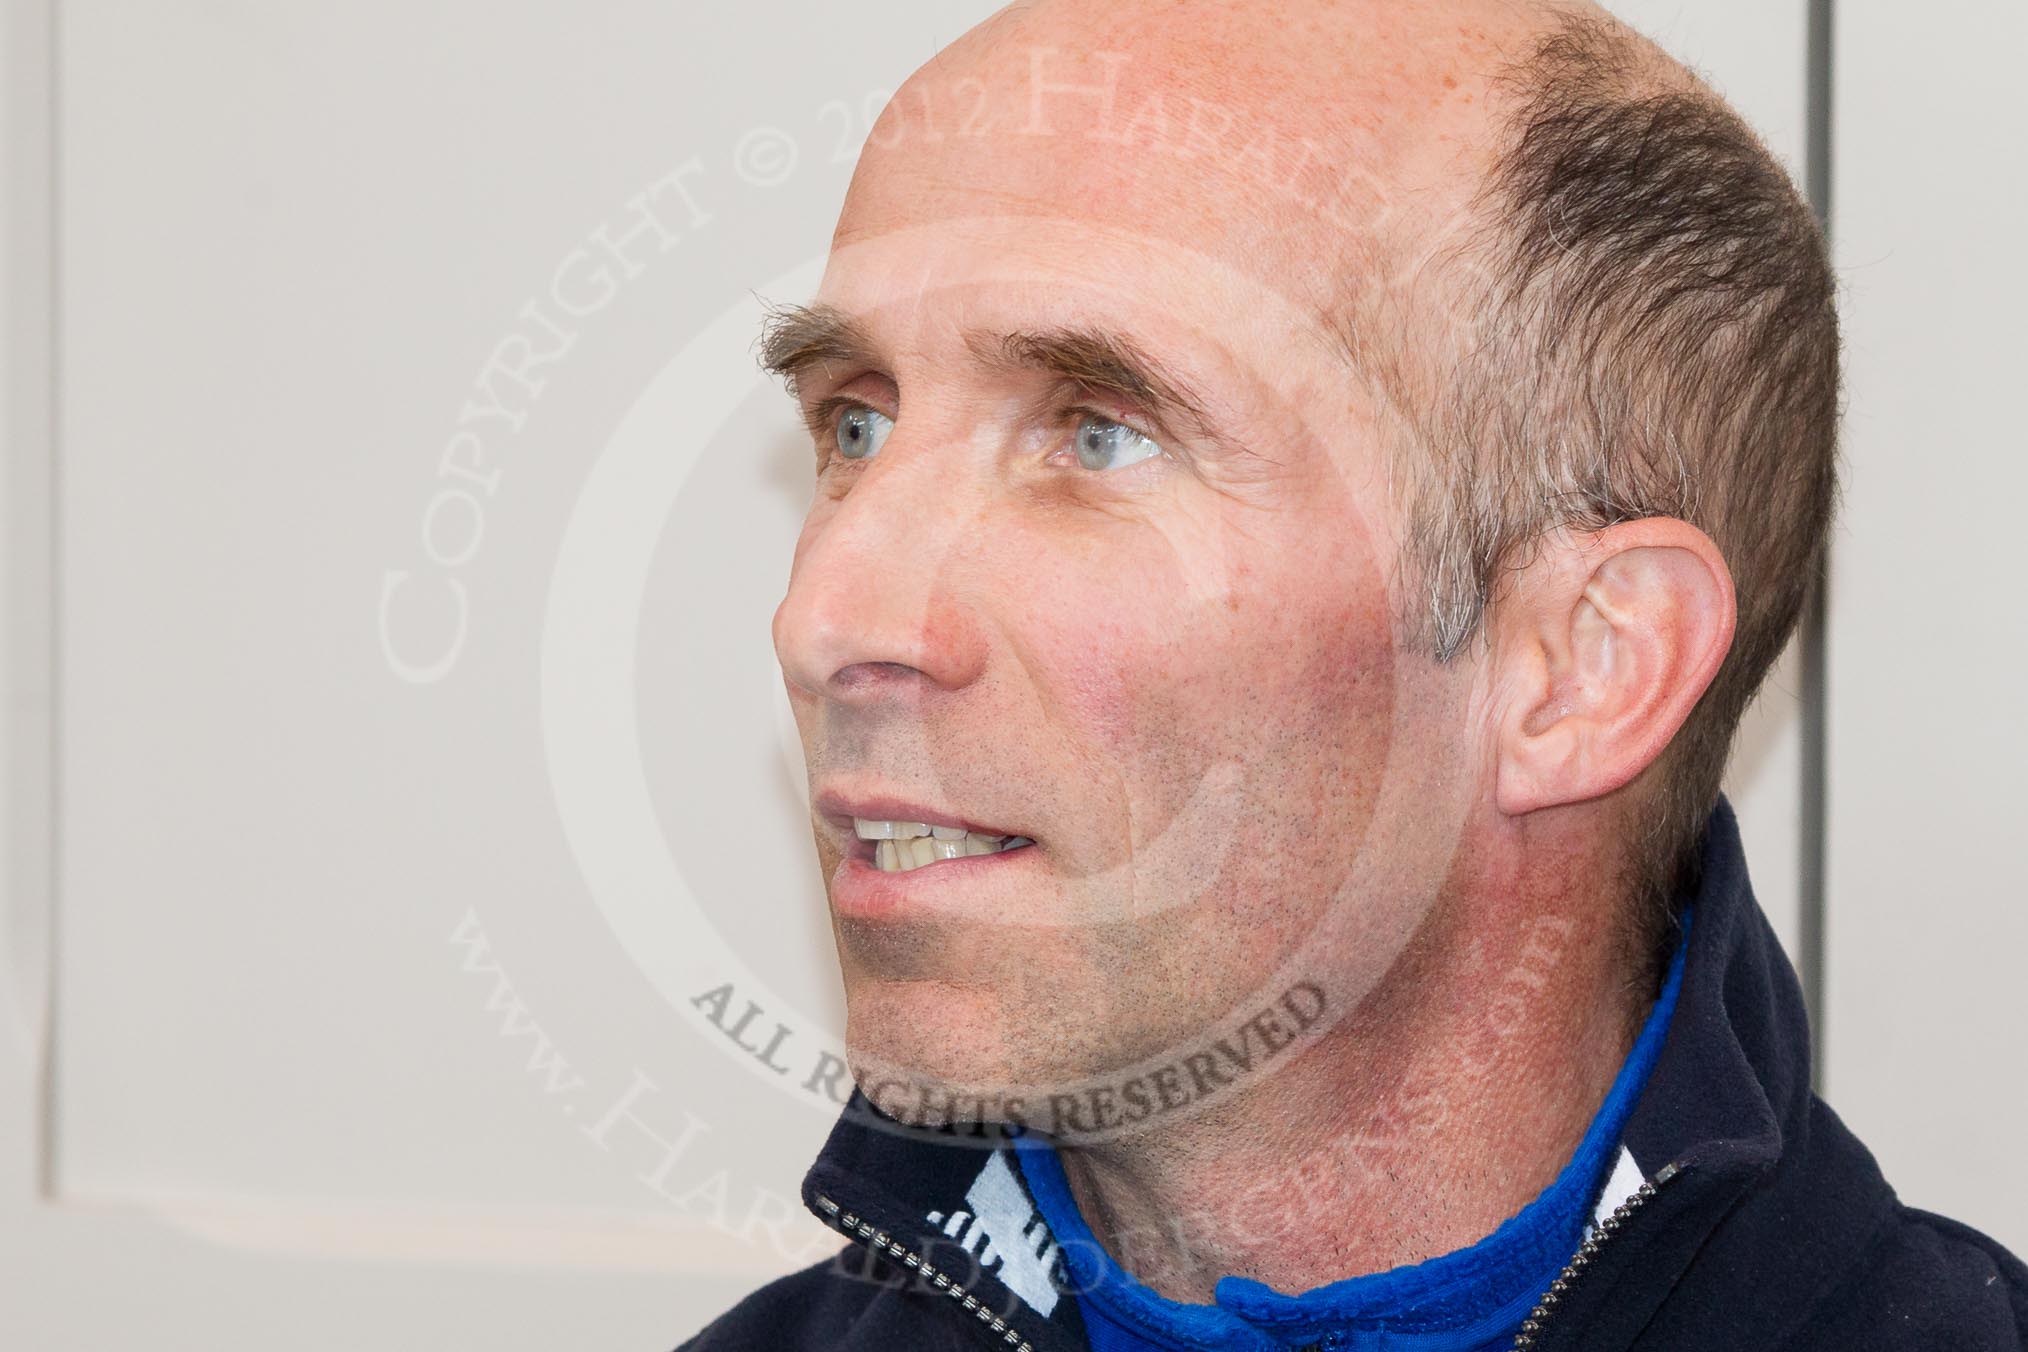 Oxford University Boat Club chief coach Sean Bowden during the press conference on April 5, 2012, at the BT Press Centre, two days before the 2012 Boat Race.